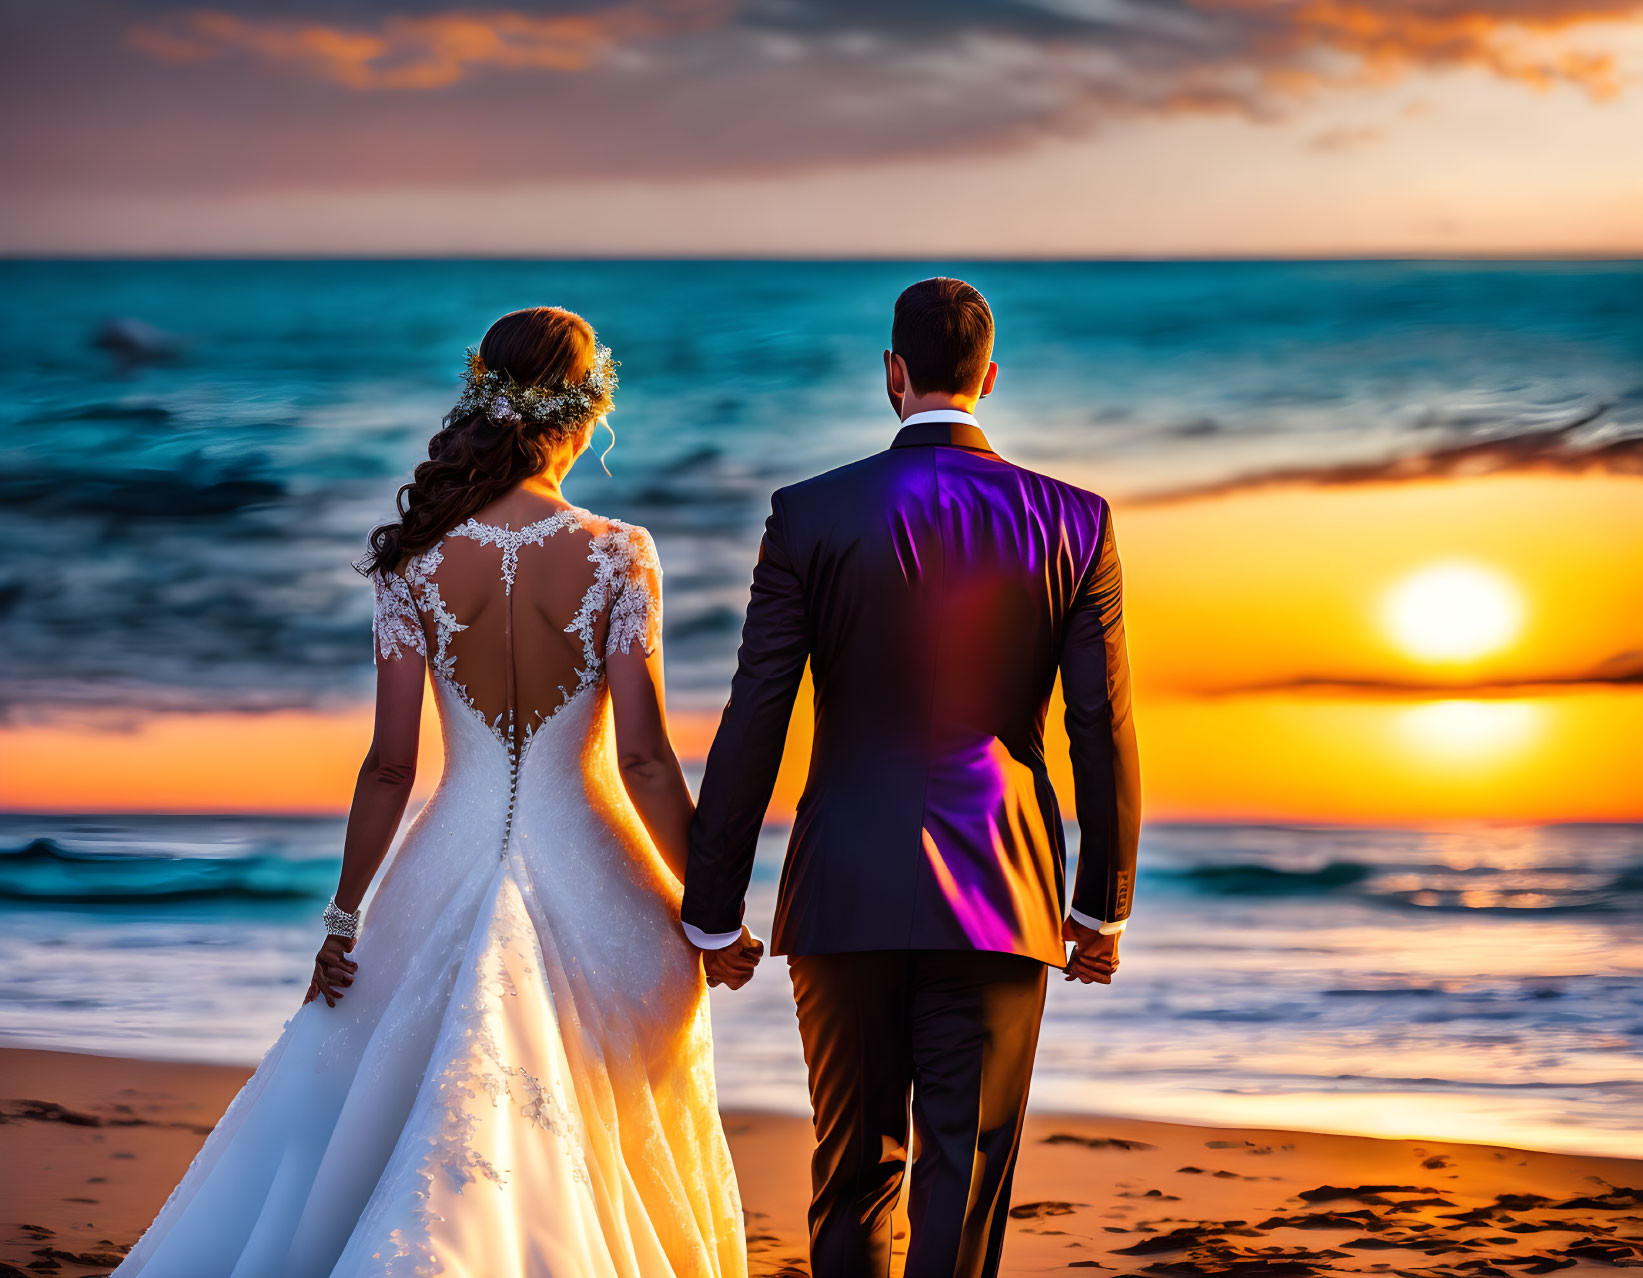 Bride and groom on the beach at sunrise